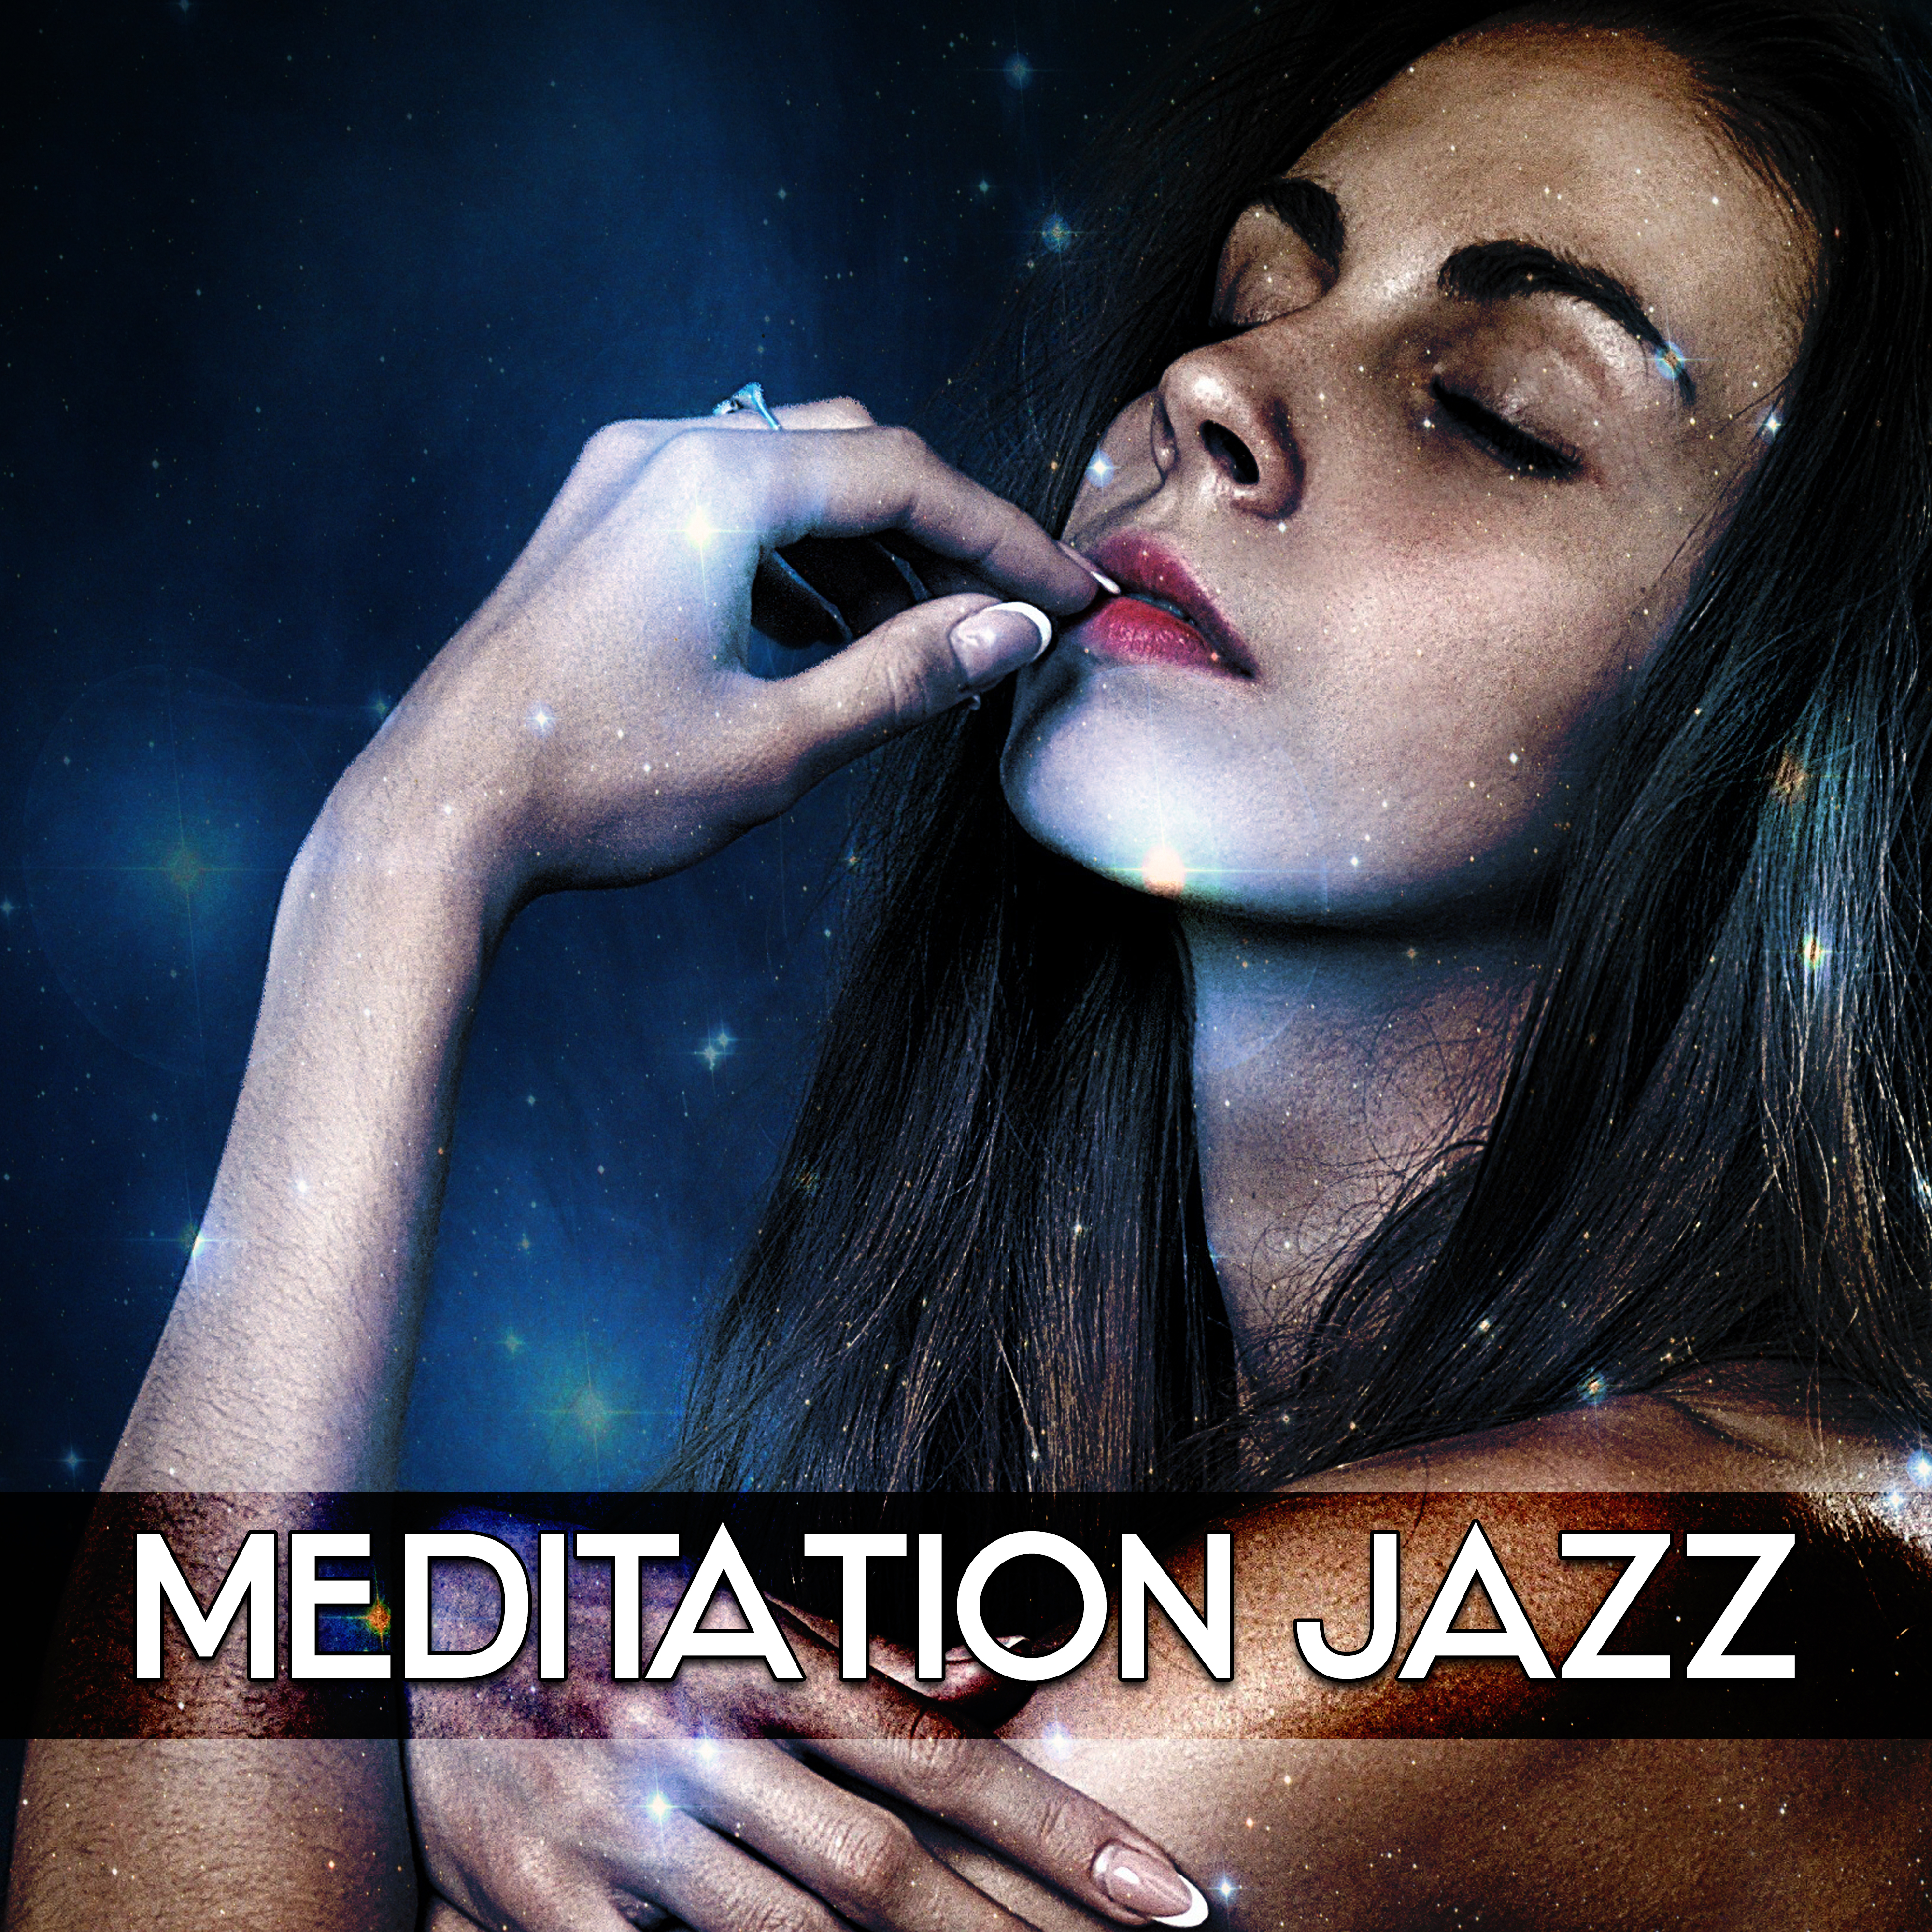 Meditation Jazz  Instrumental Jazz Music, Relaxation Sounds, Sentimental Melodies, Piano Music, Songs at Night